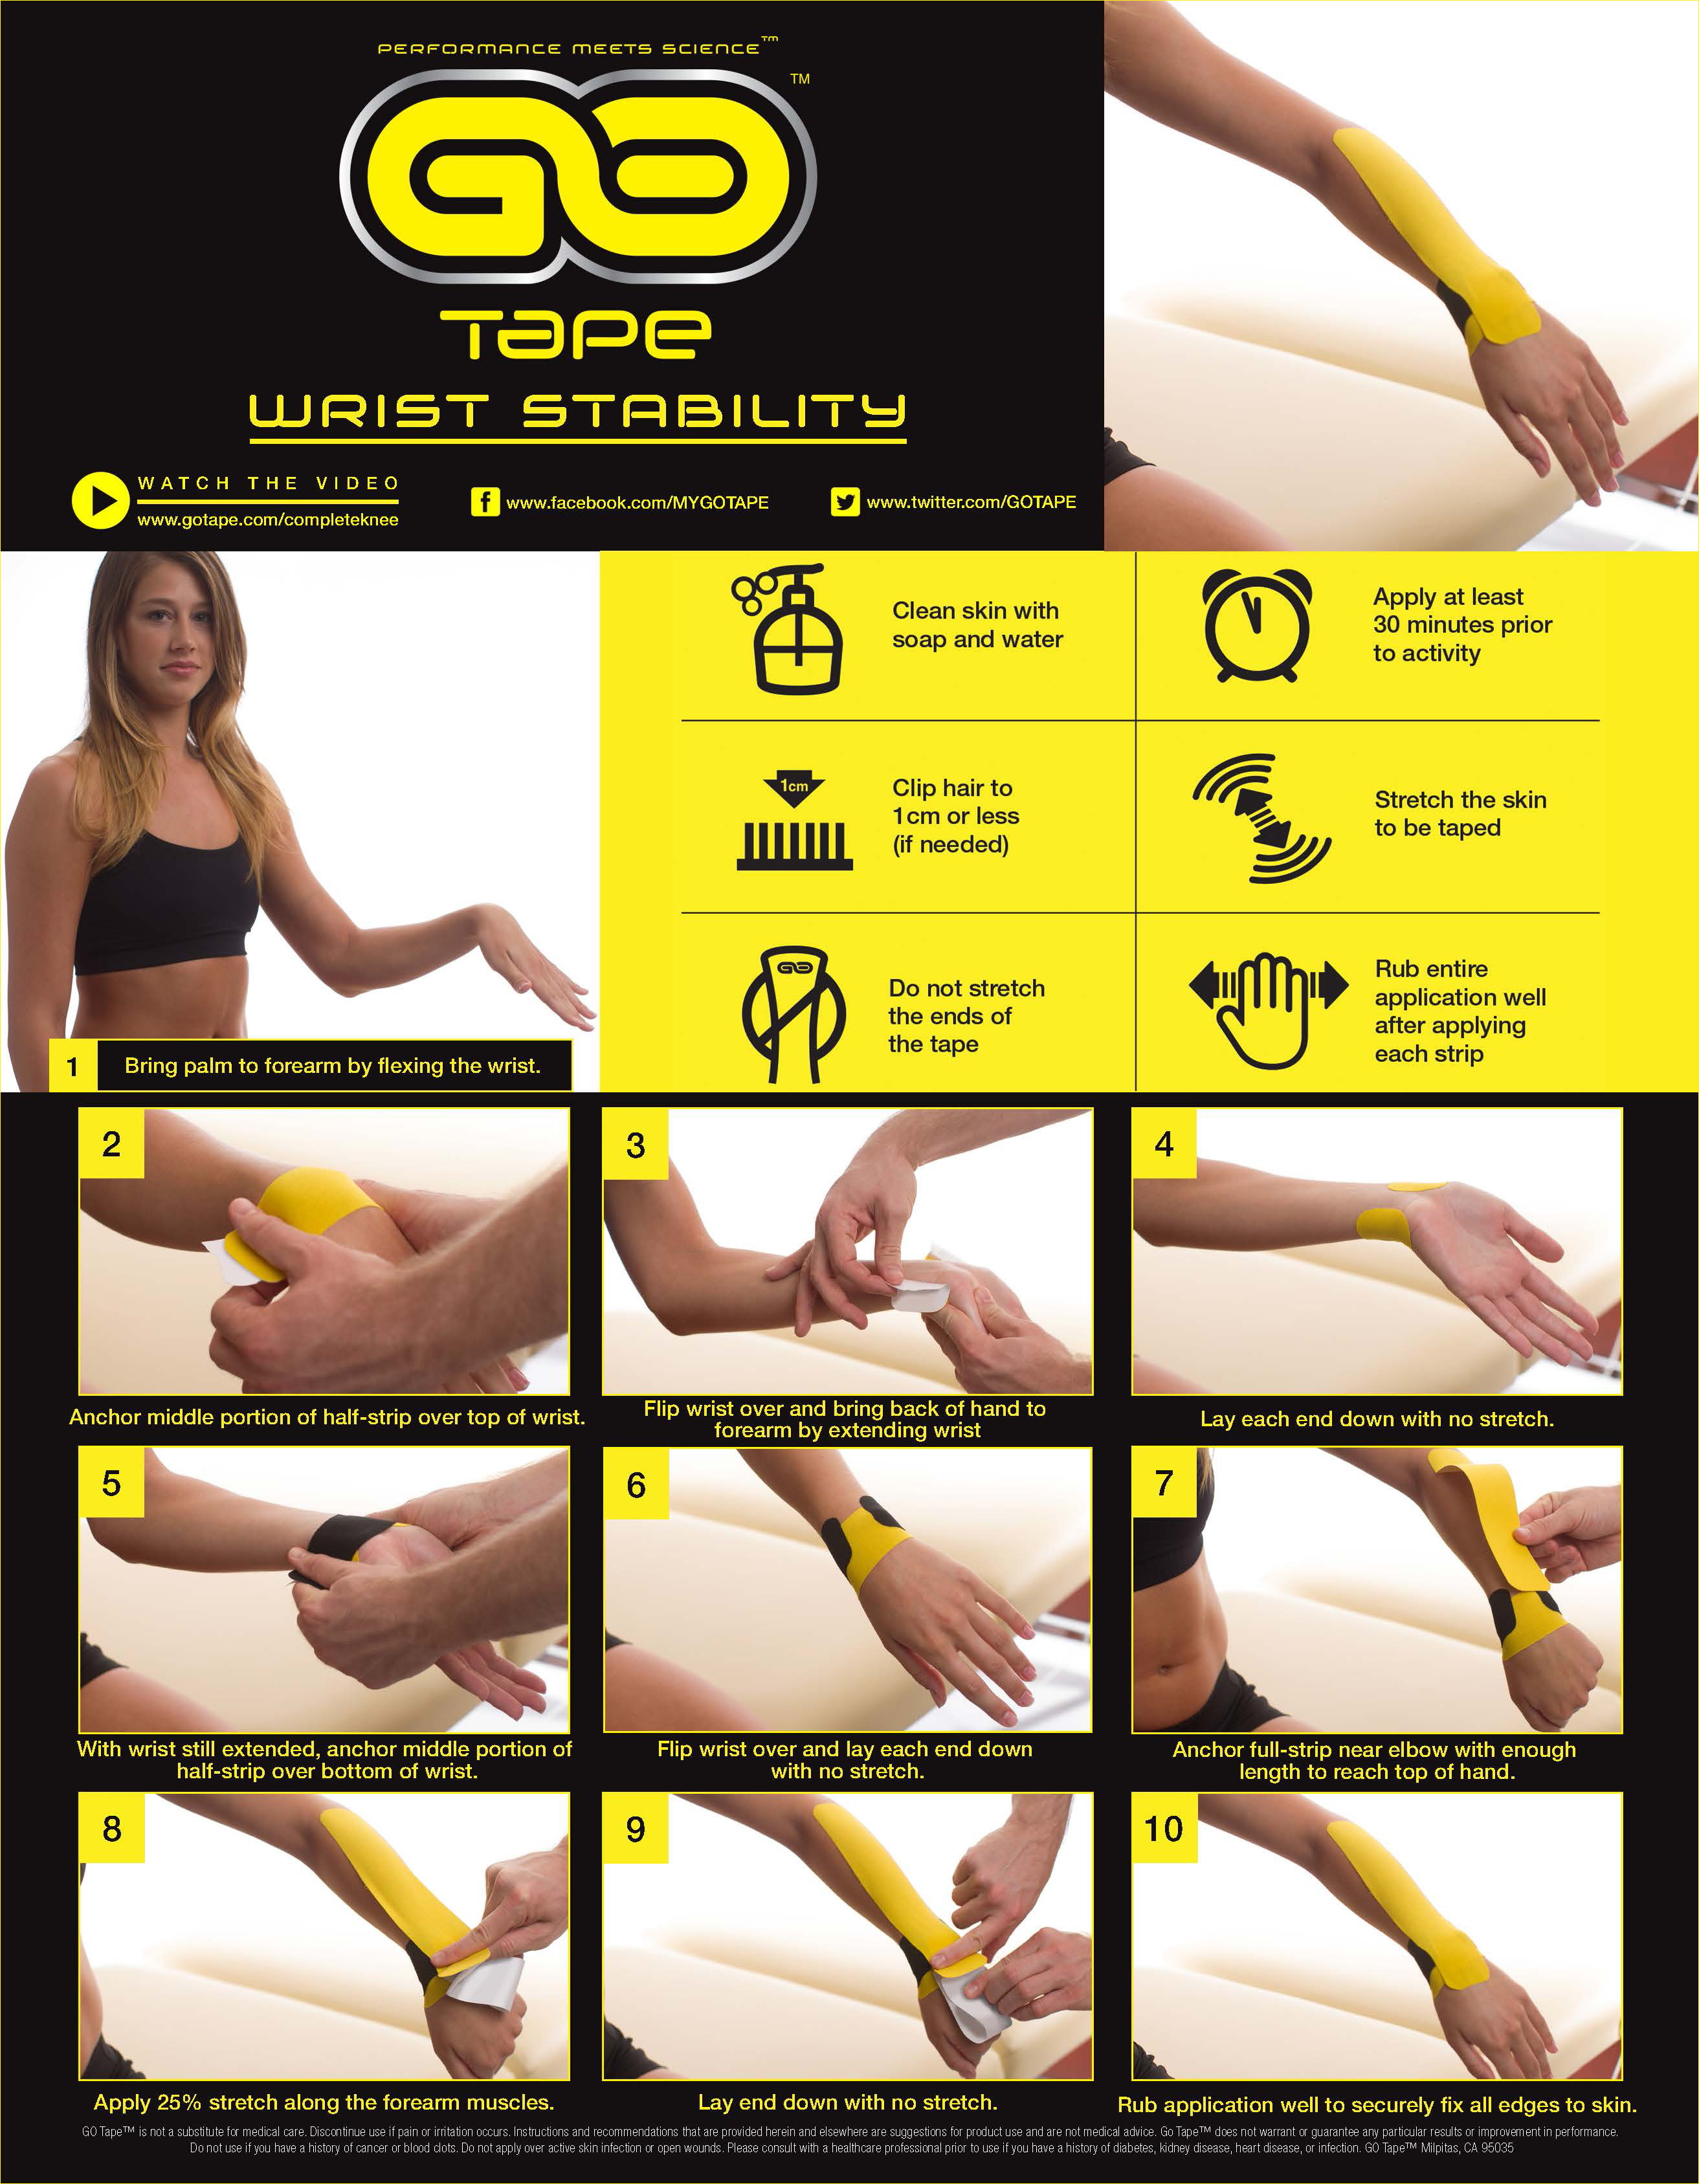 GO_Tape_Application_Instructions_Wrist_Stability